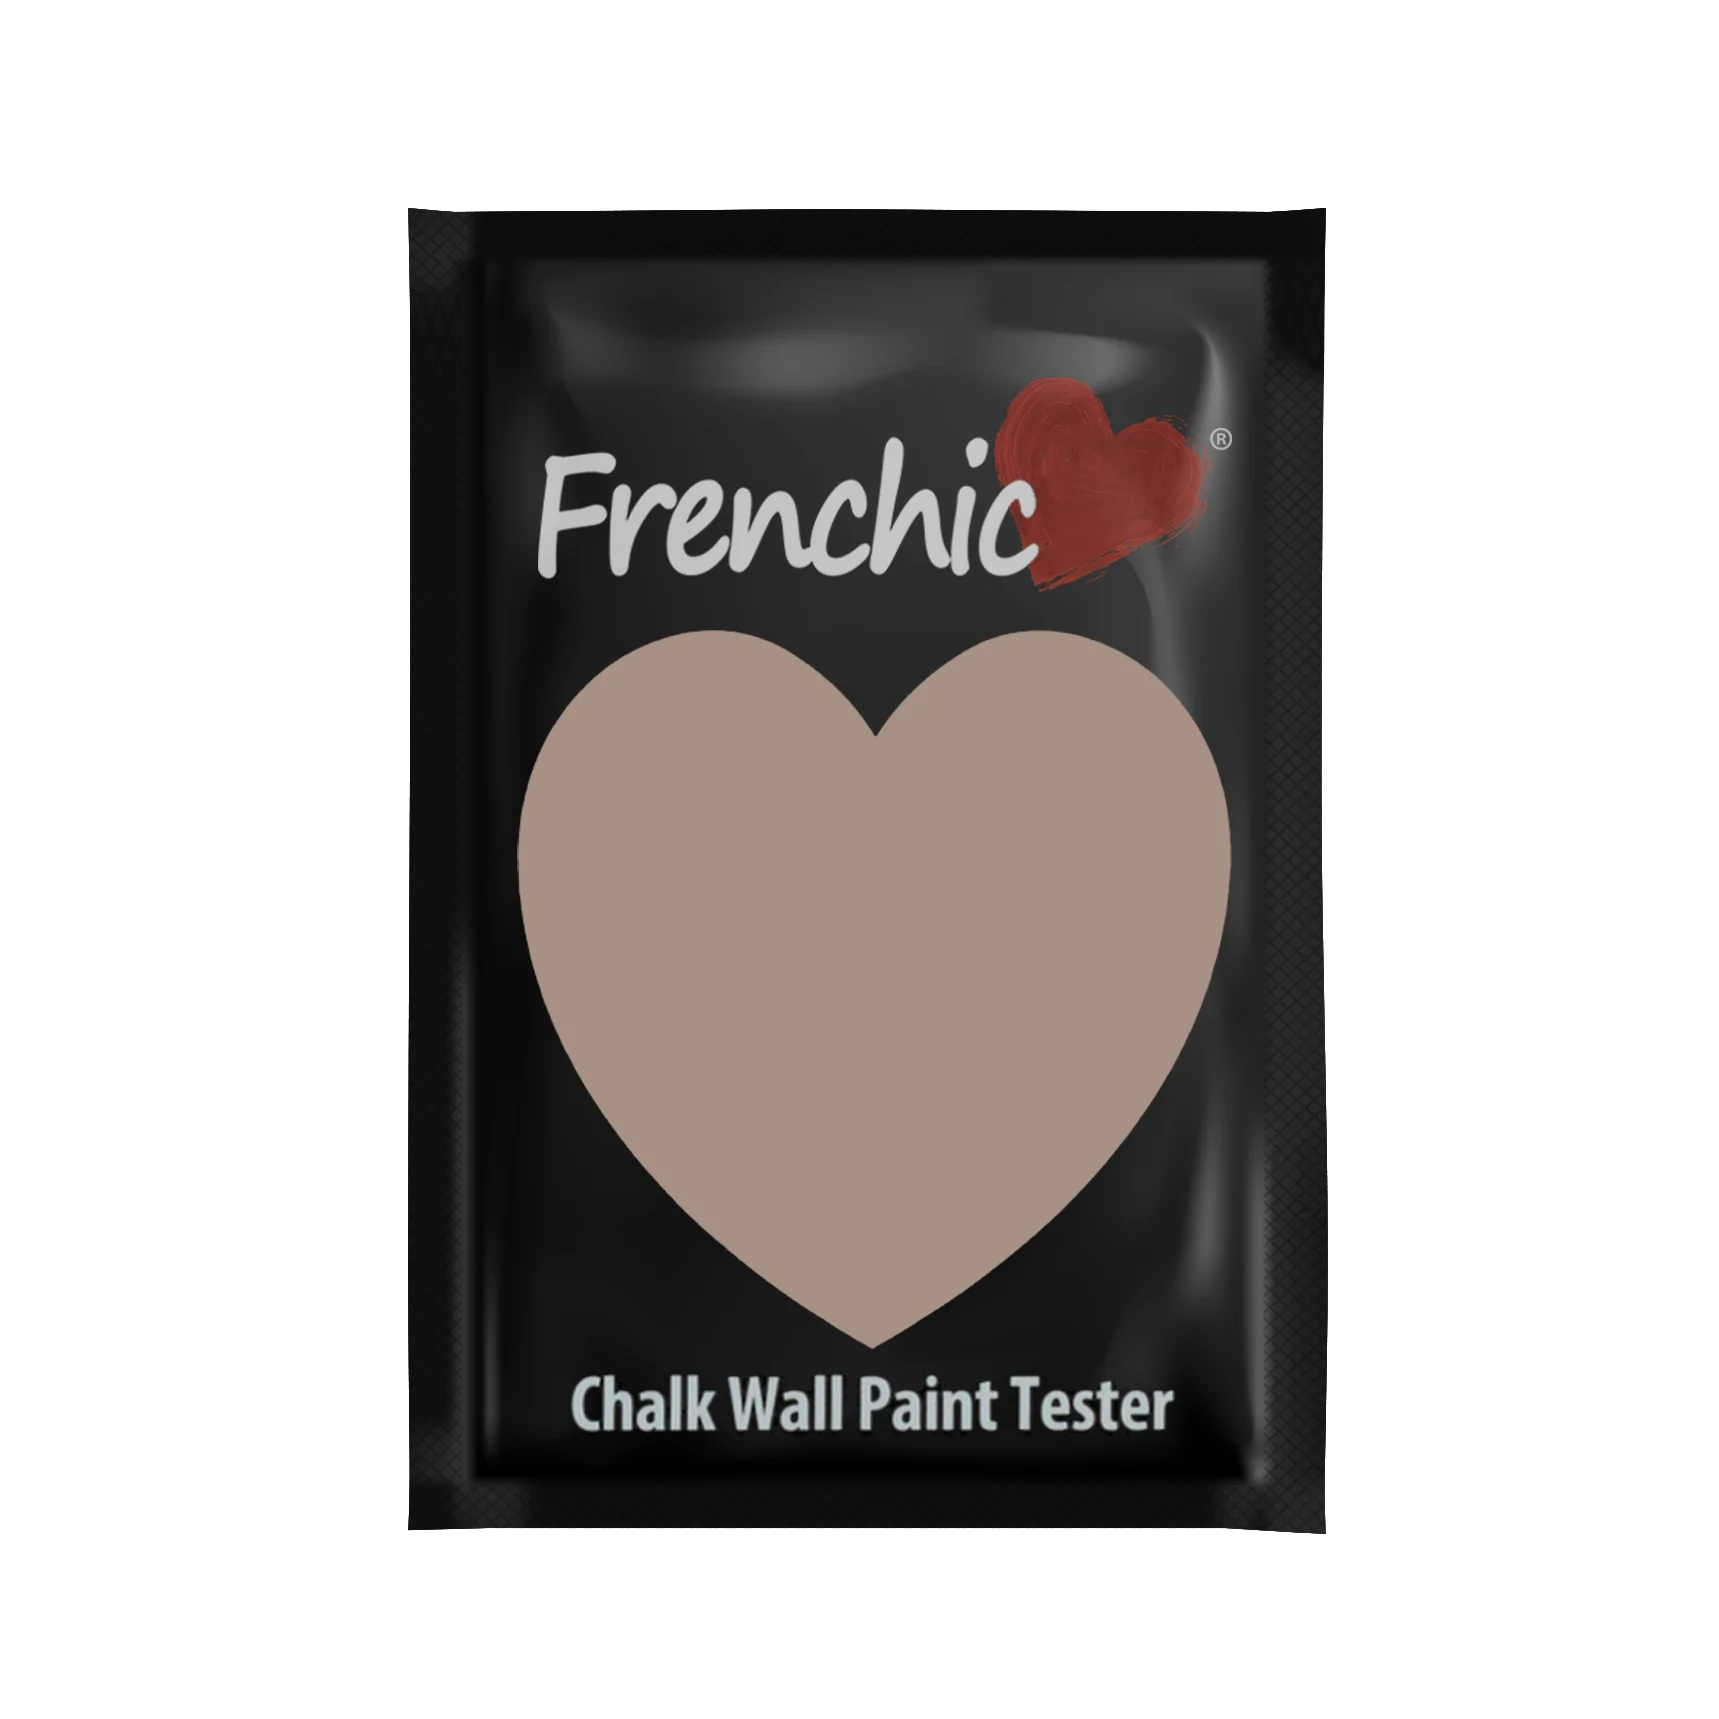 Frenchic Paint | Moleskin Paint Sample by Weirs of Baggot St